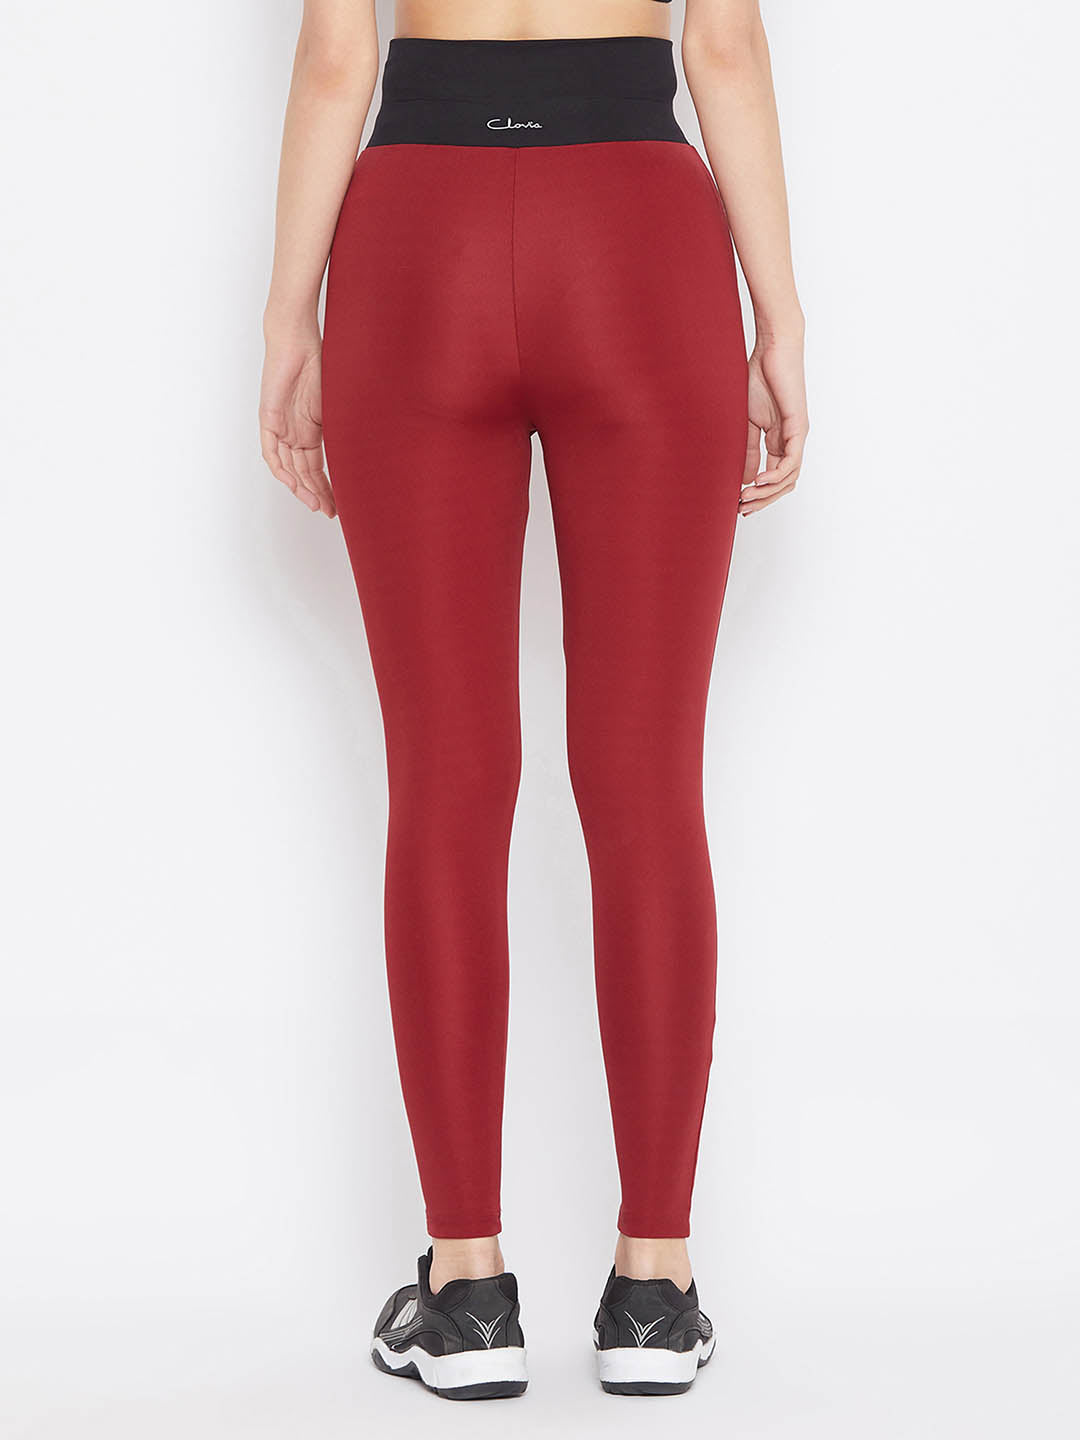 Activewear Ankle Length Tights In Red